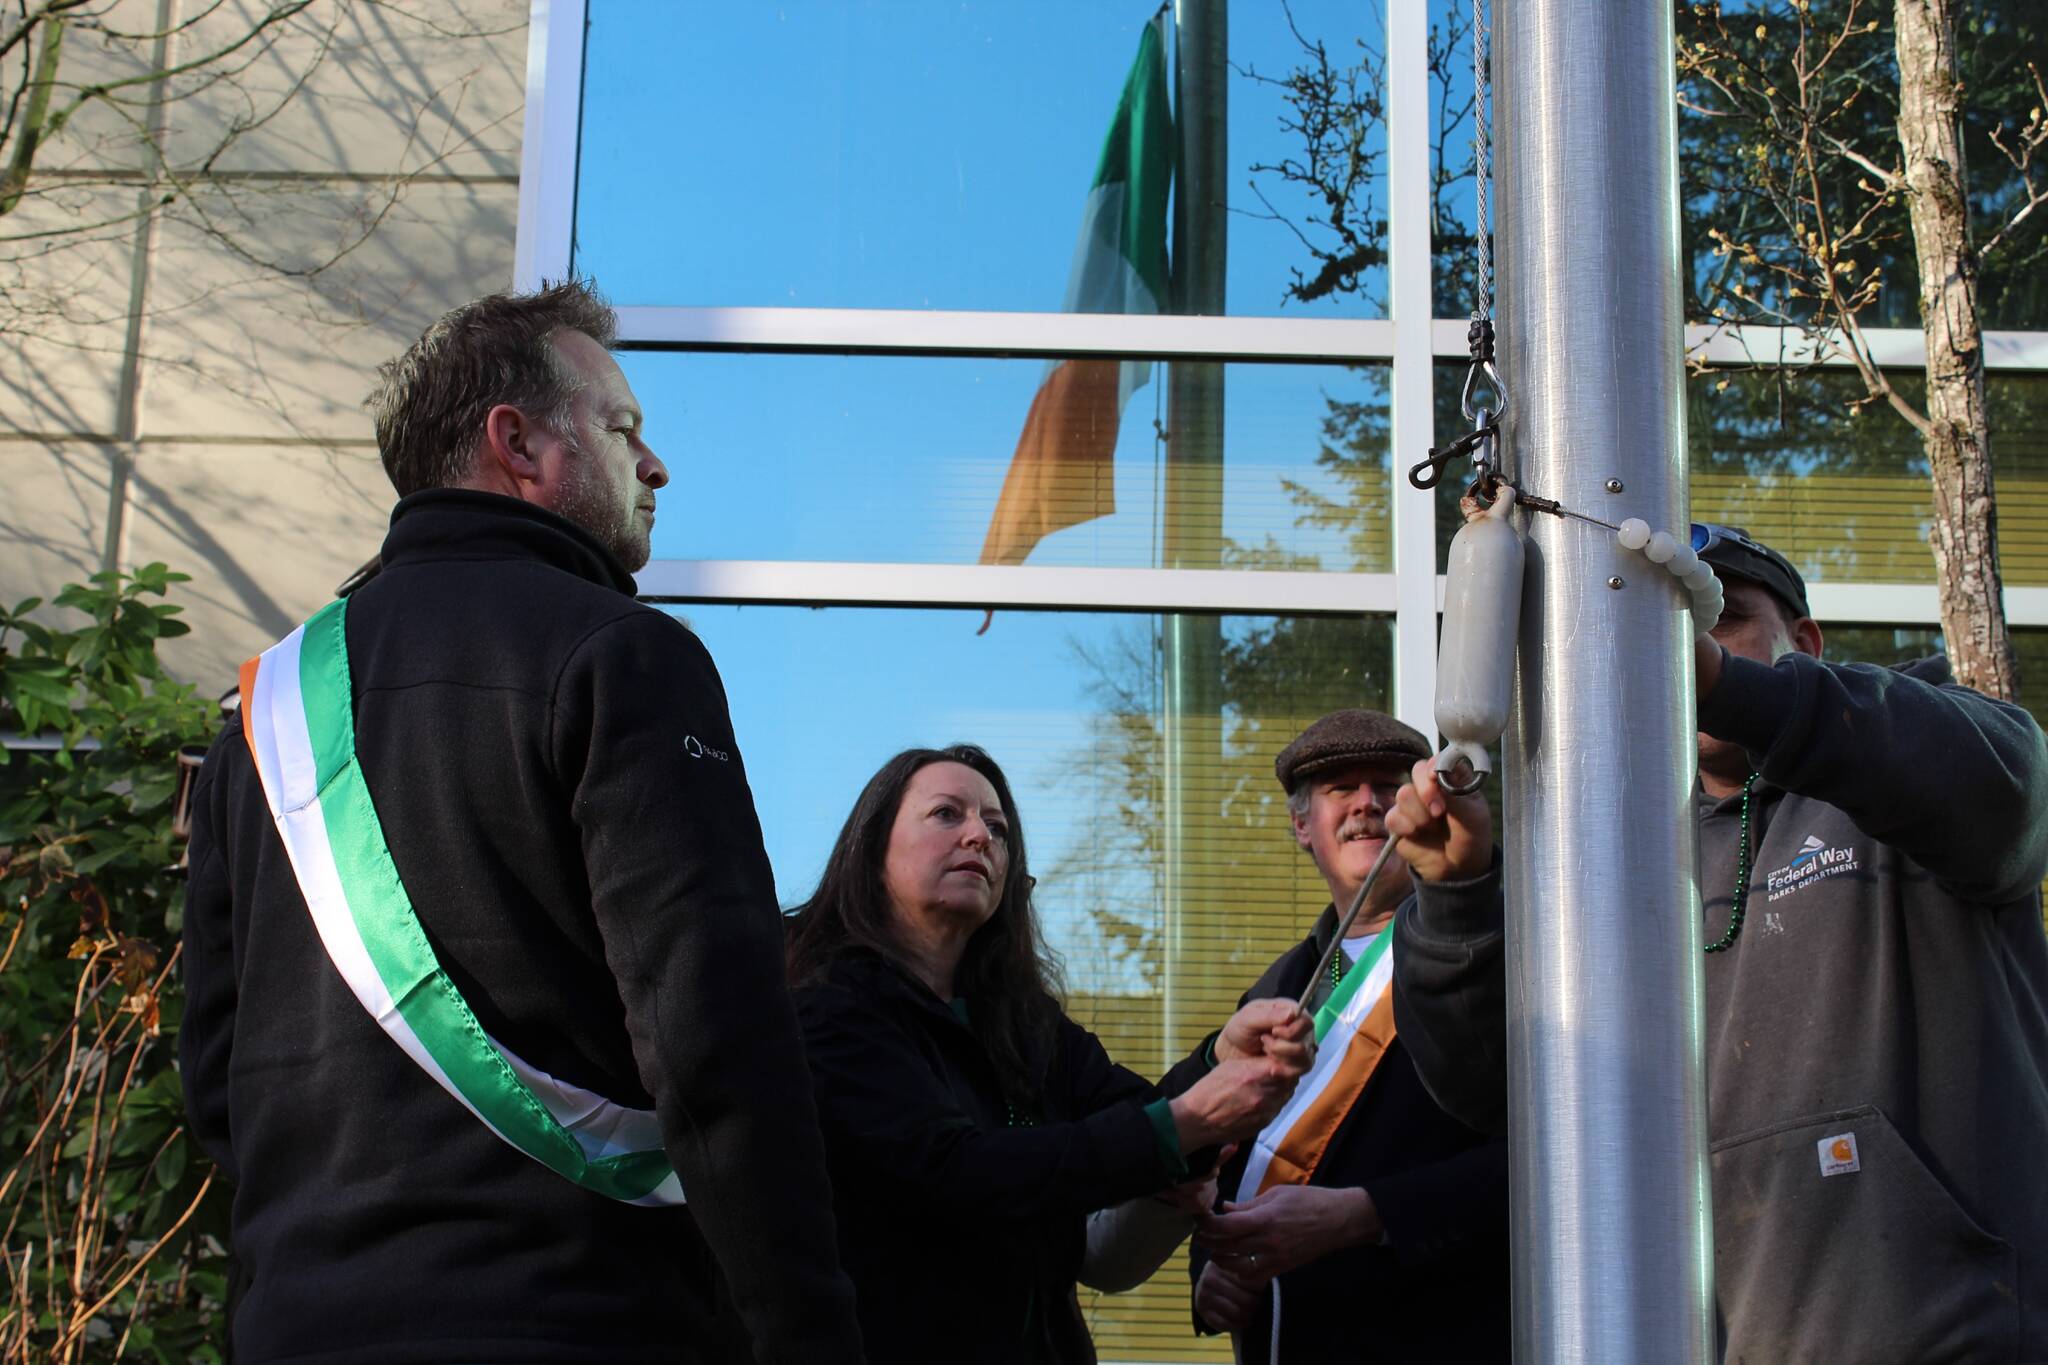 The Patrick family, friends and a city employee raise the Irish flag, as visible in the reflection of City Hall. Alex Bruell / The Mirror